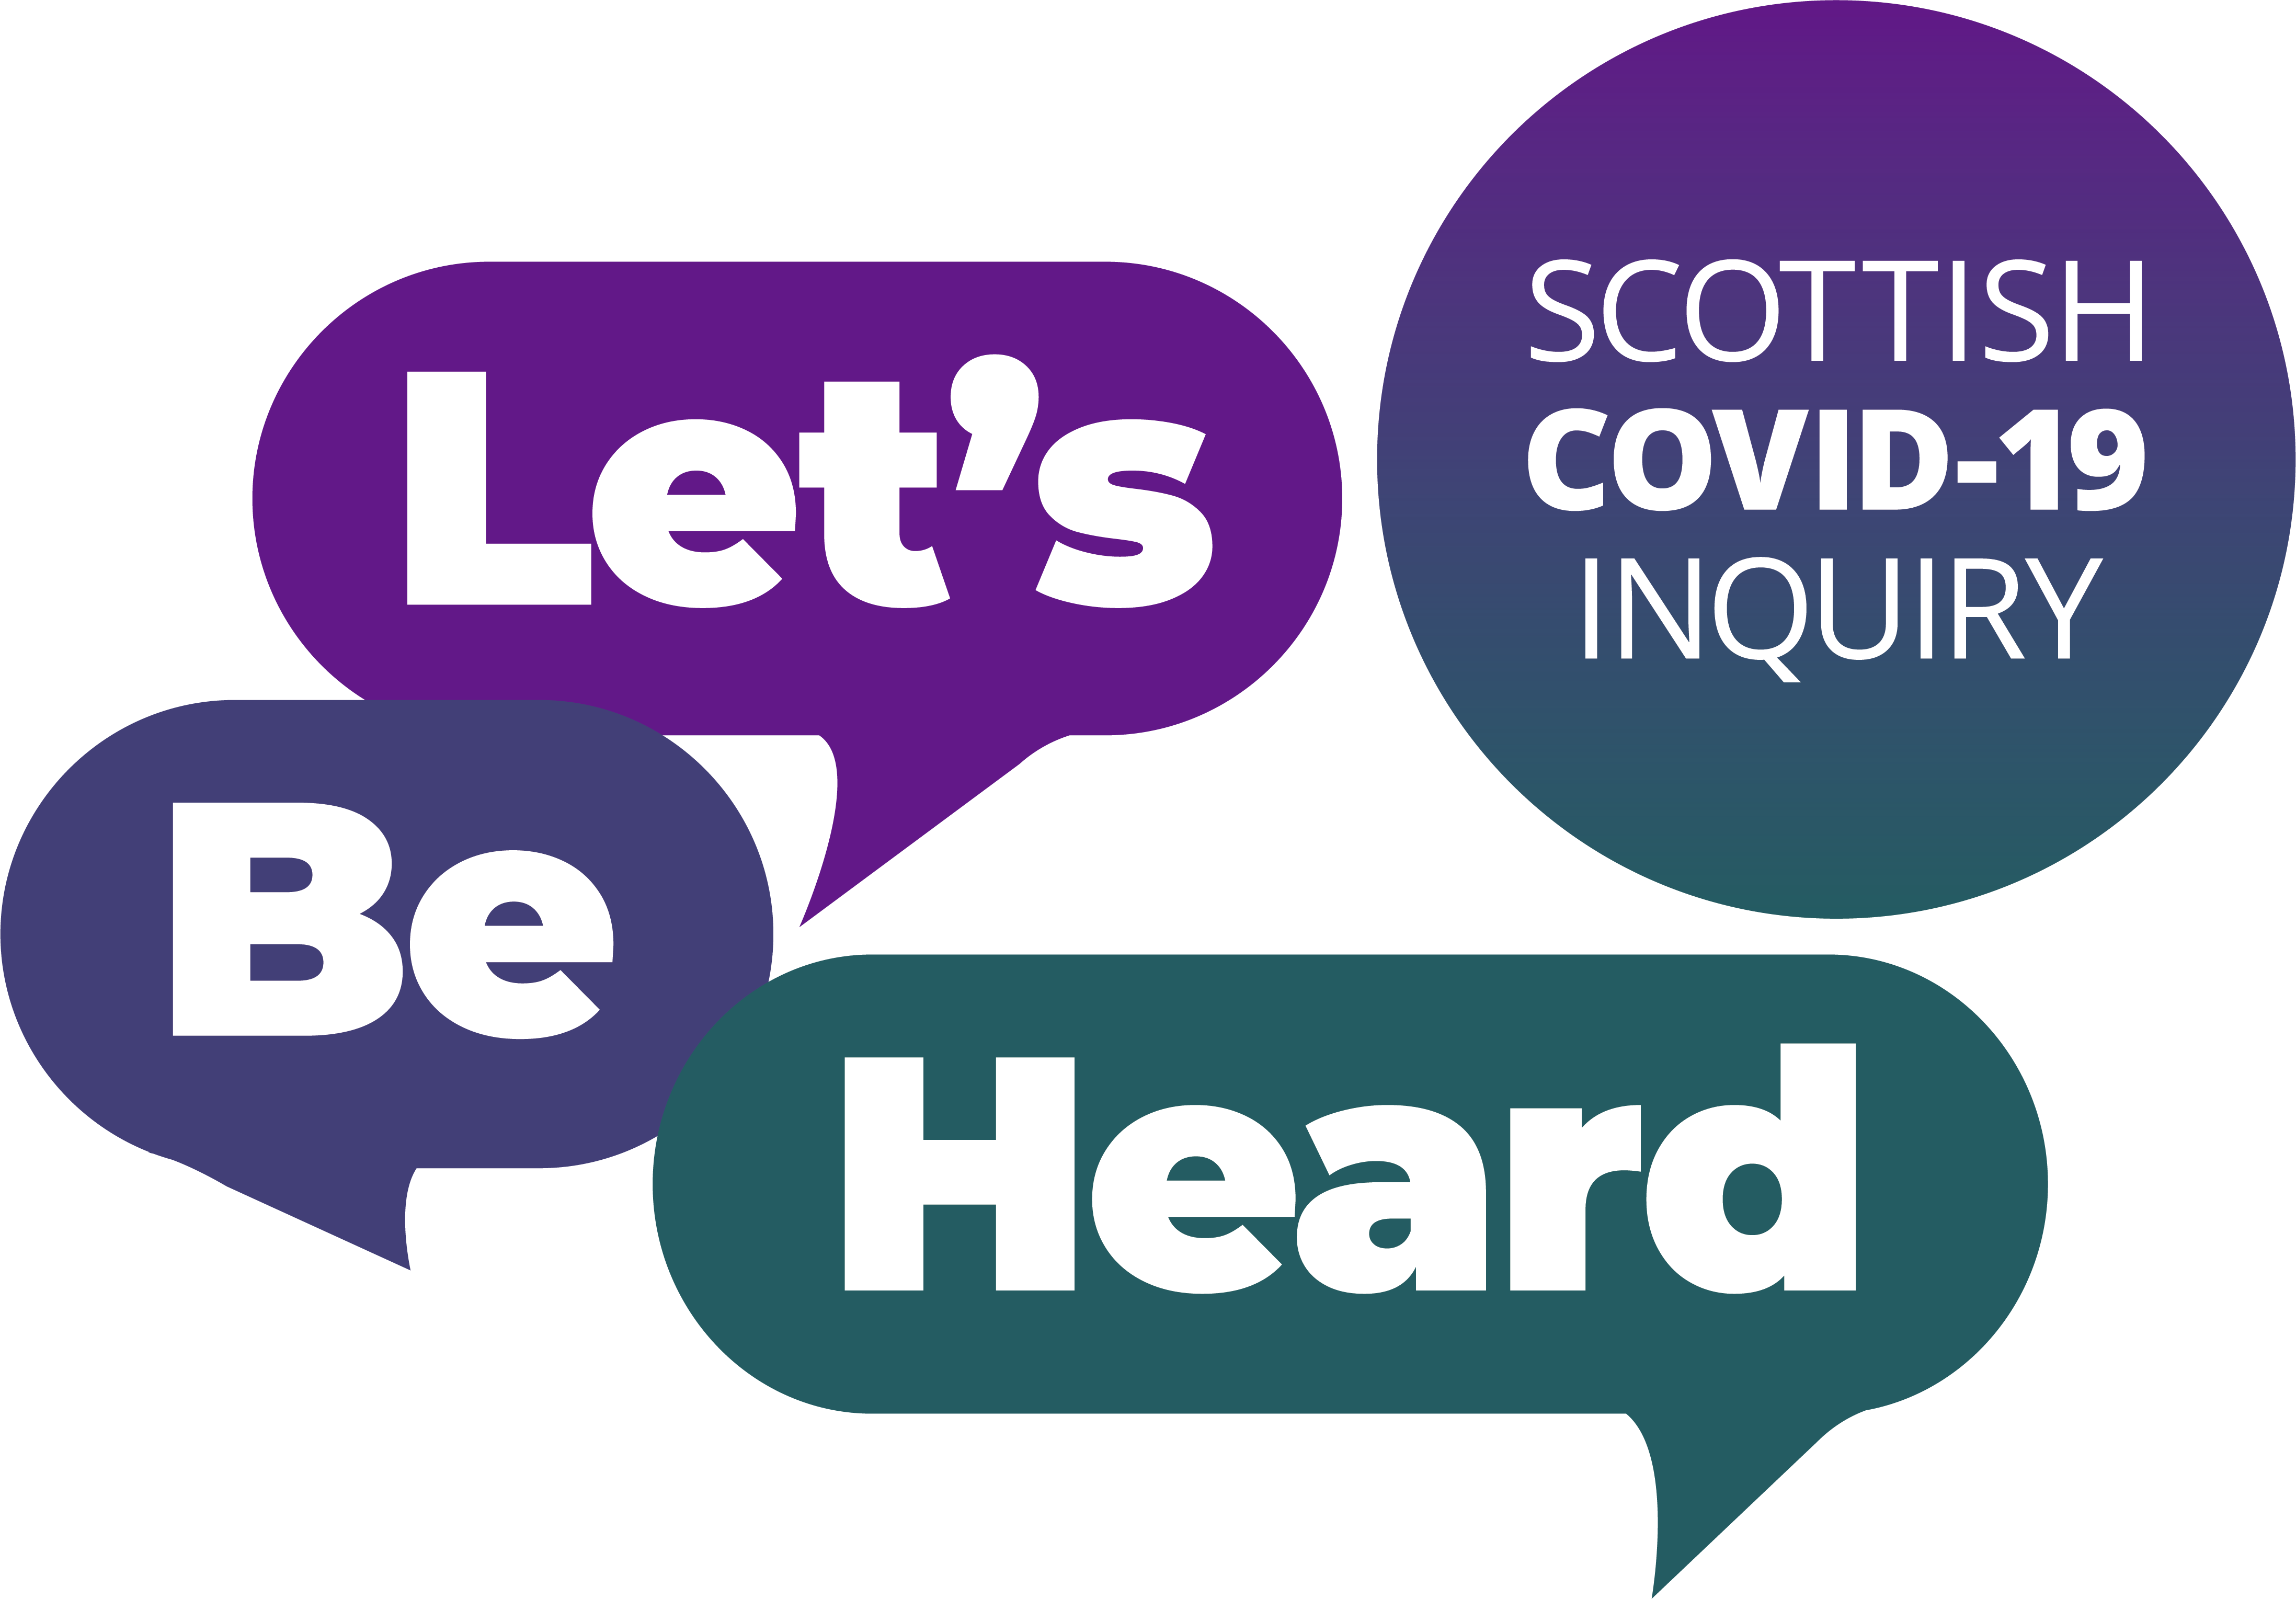 Let's Be Heard: Sharing Scotland's COVID Experience is the Scottish COVID-19 Inquiry's listening project.